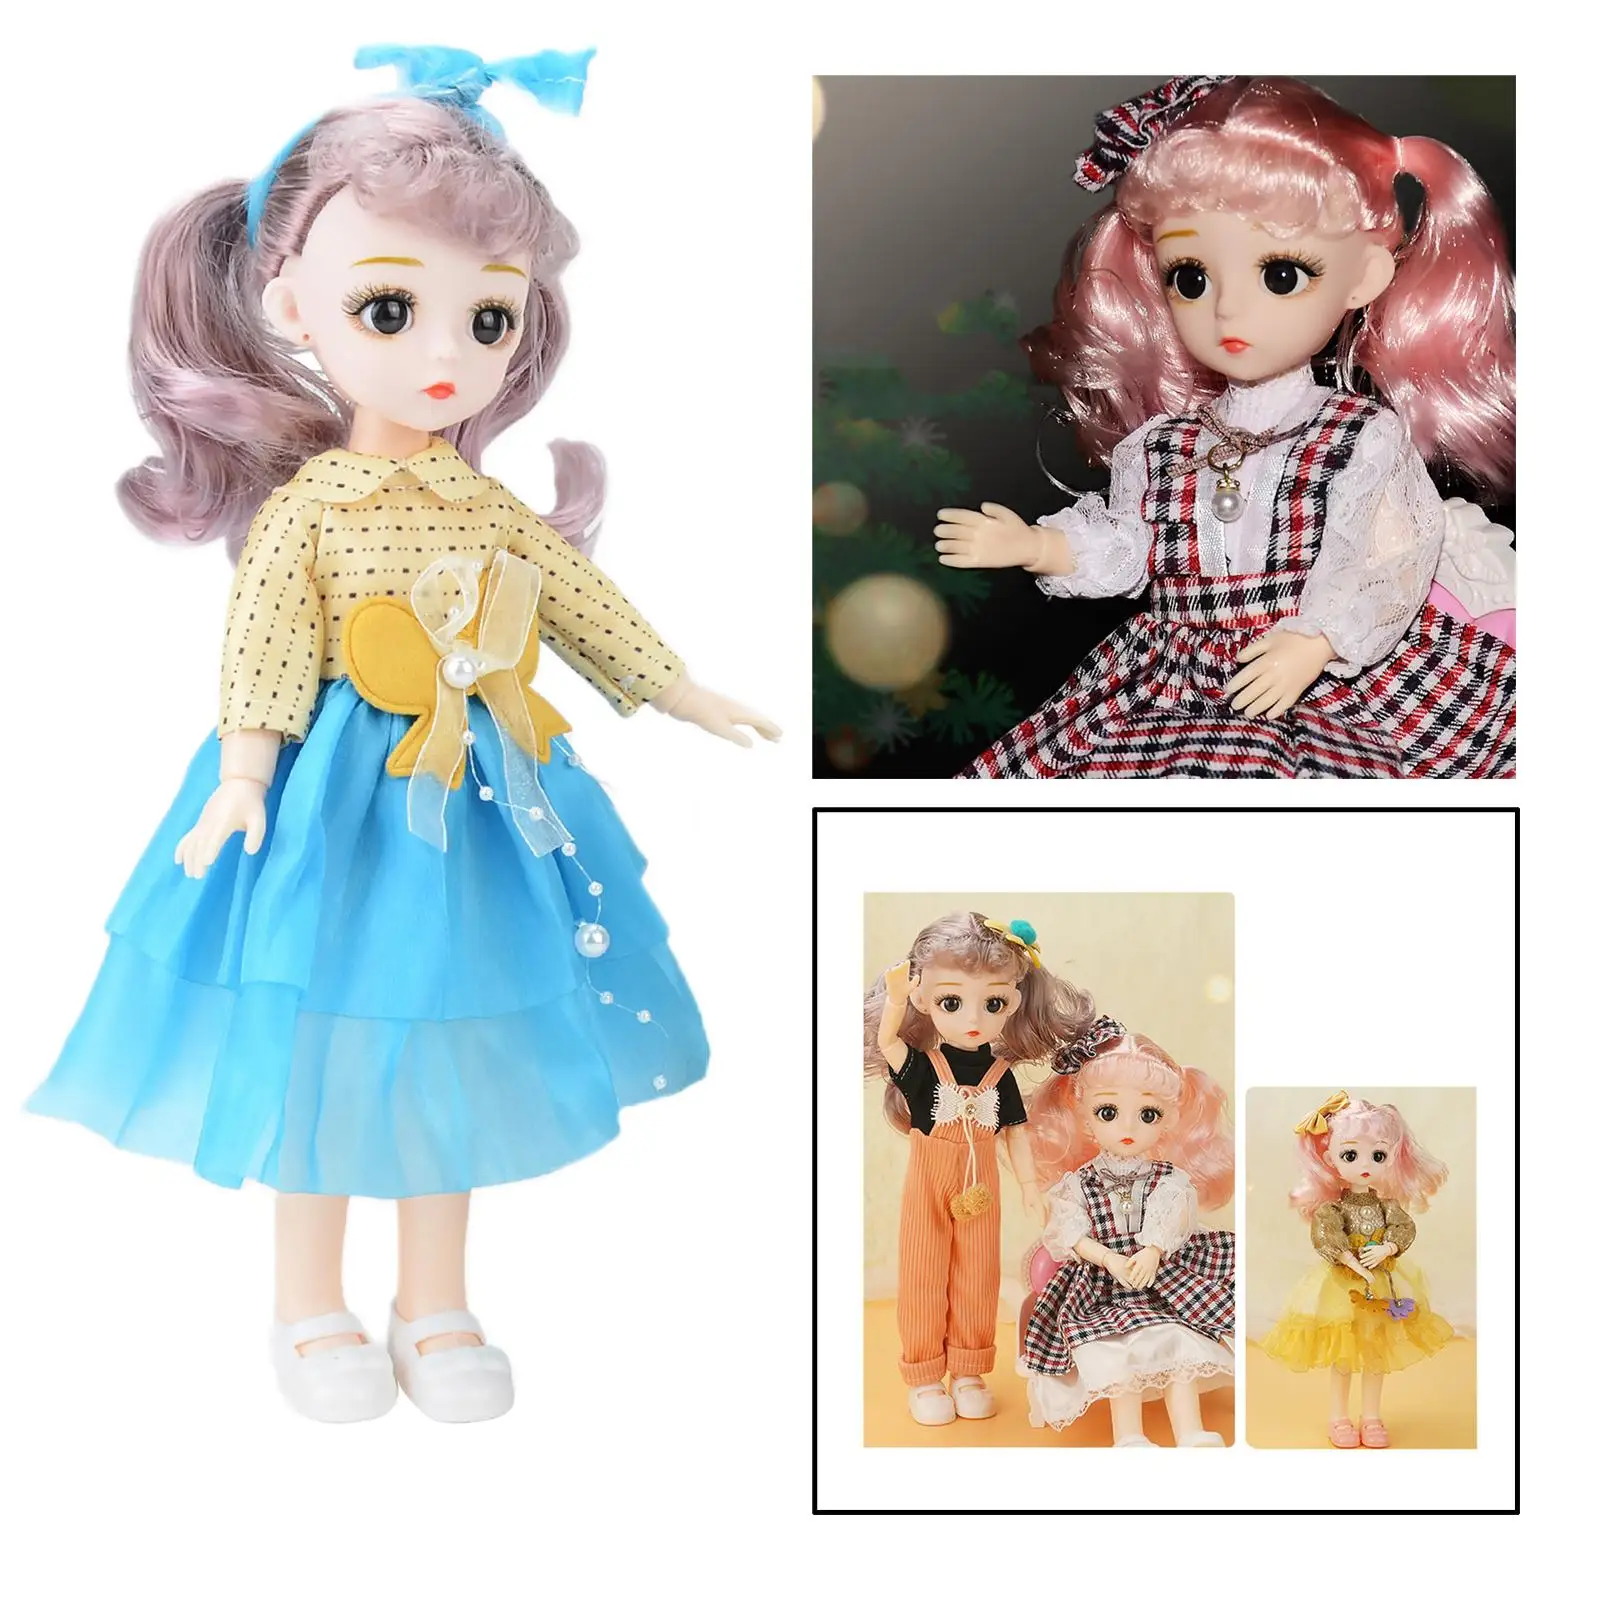 Adorable 12inch Doll Girl Doll 11 Flexible Joint Ball Joint Dolls Fashion Doll for Kids Toys with Dress Play Doll